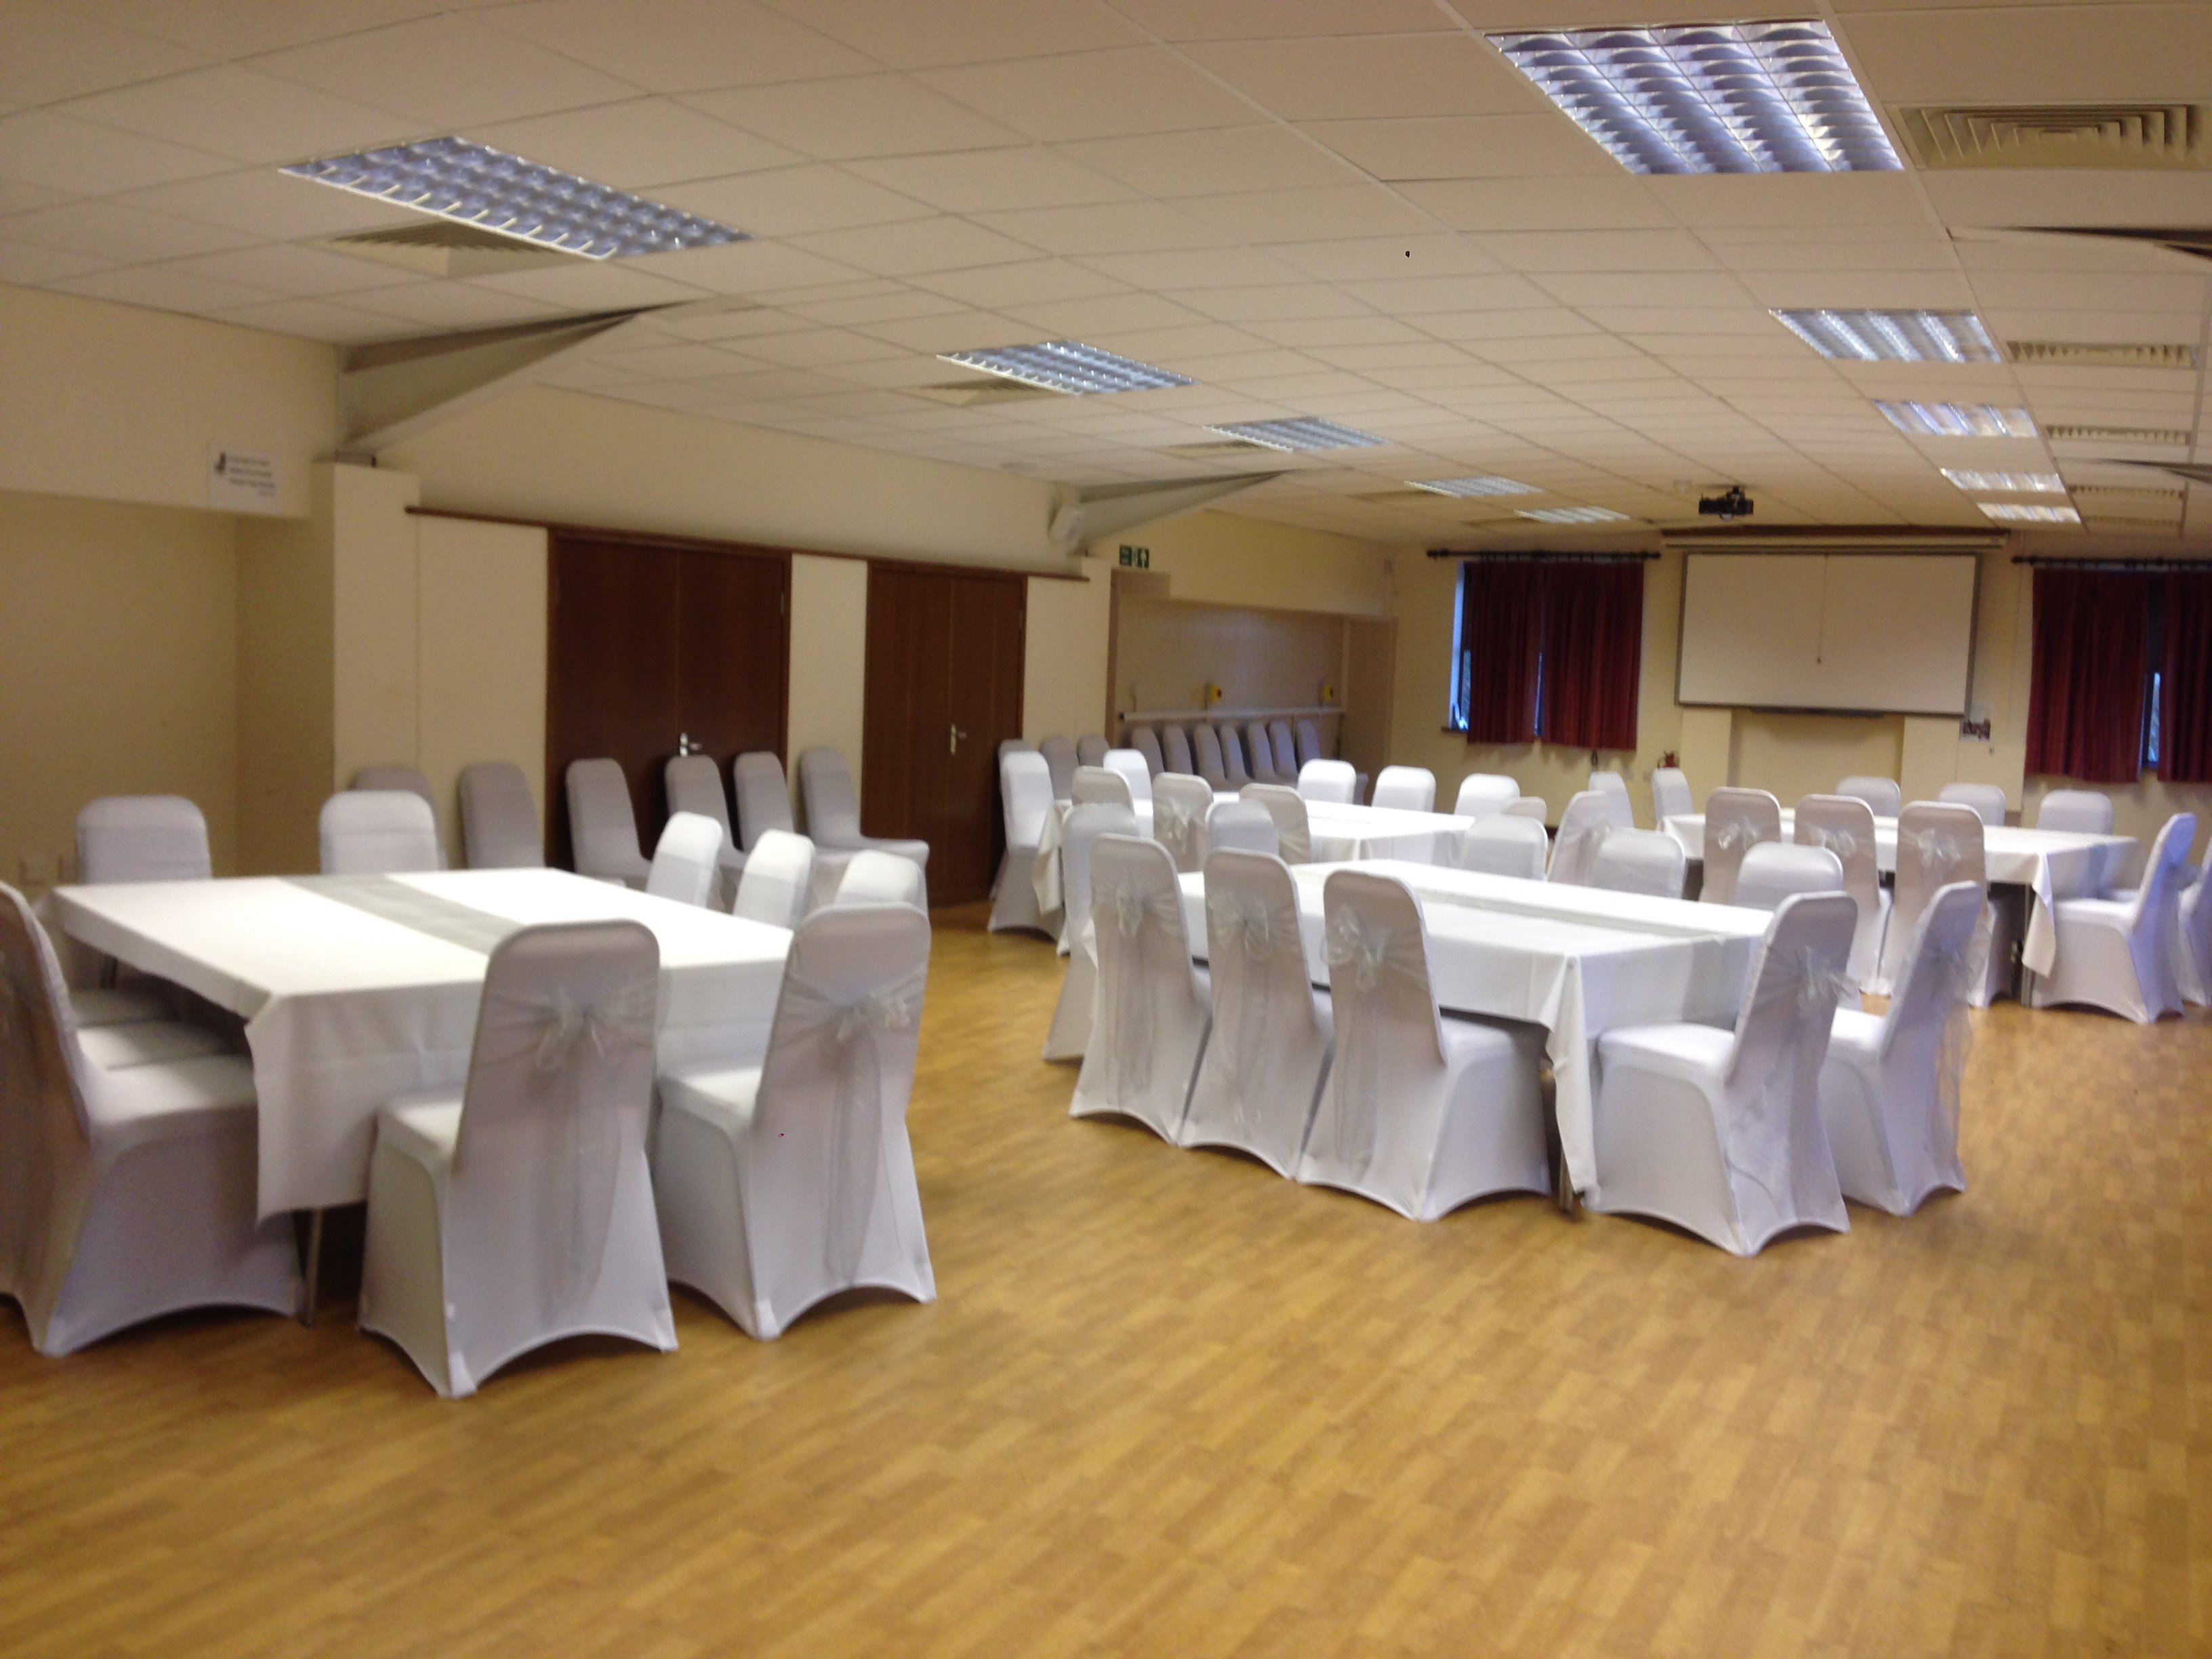 Silver organza sashes and white lycra chair covers at Barleylands function room